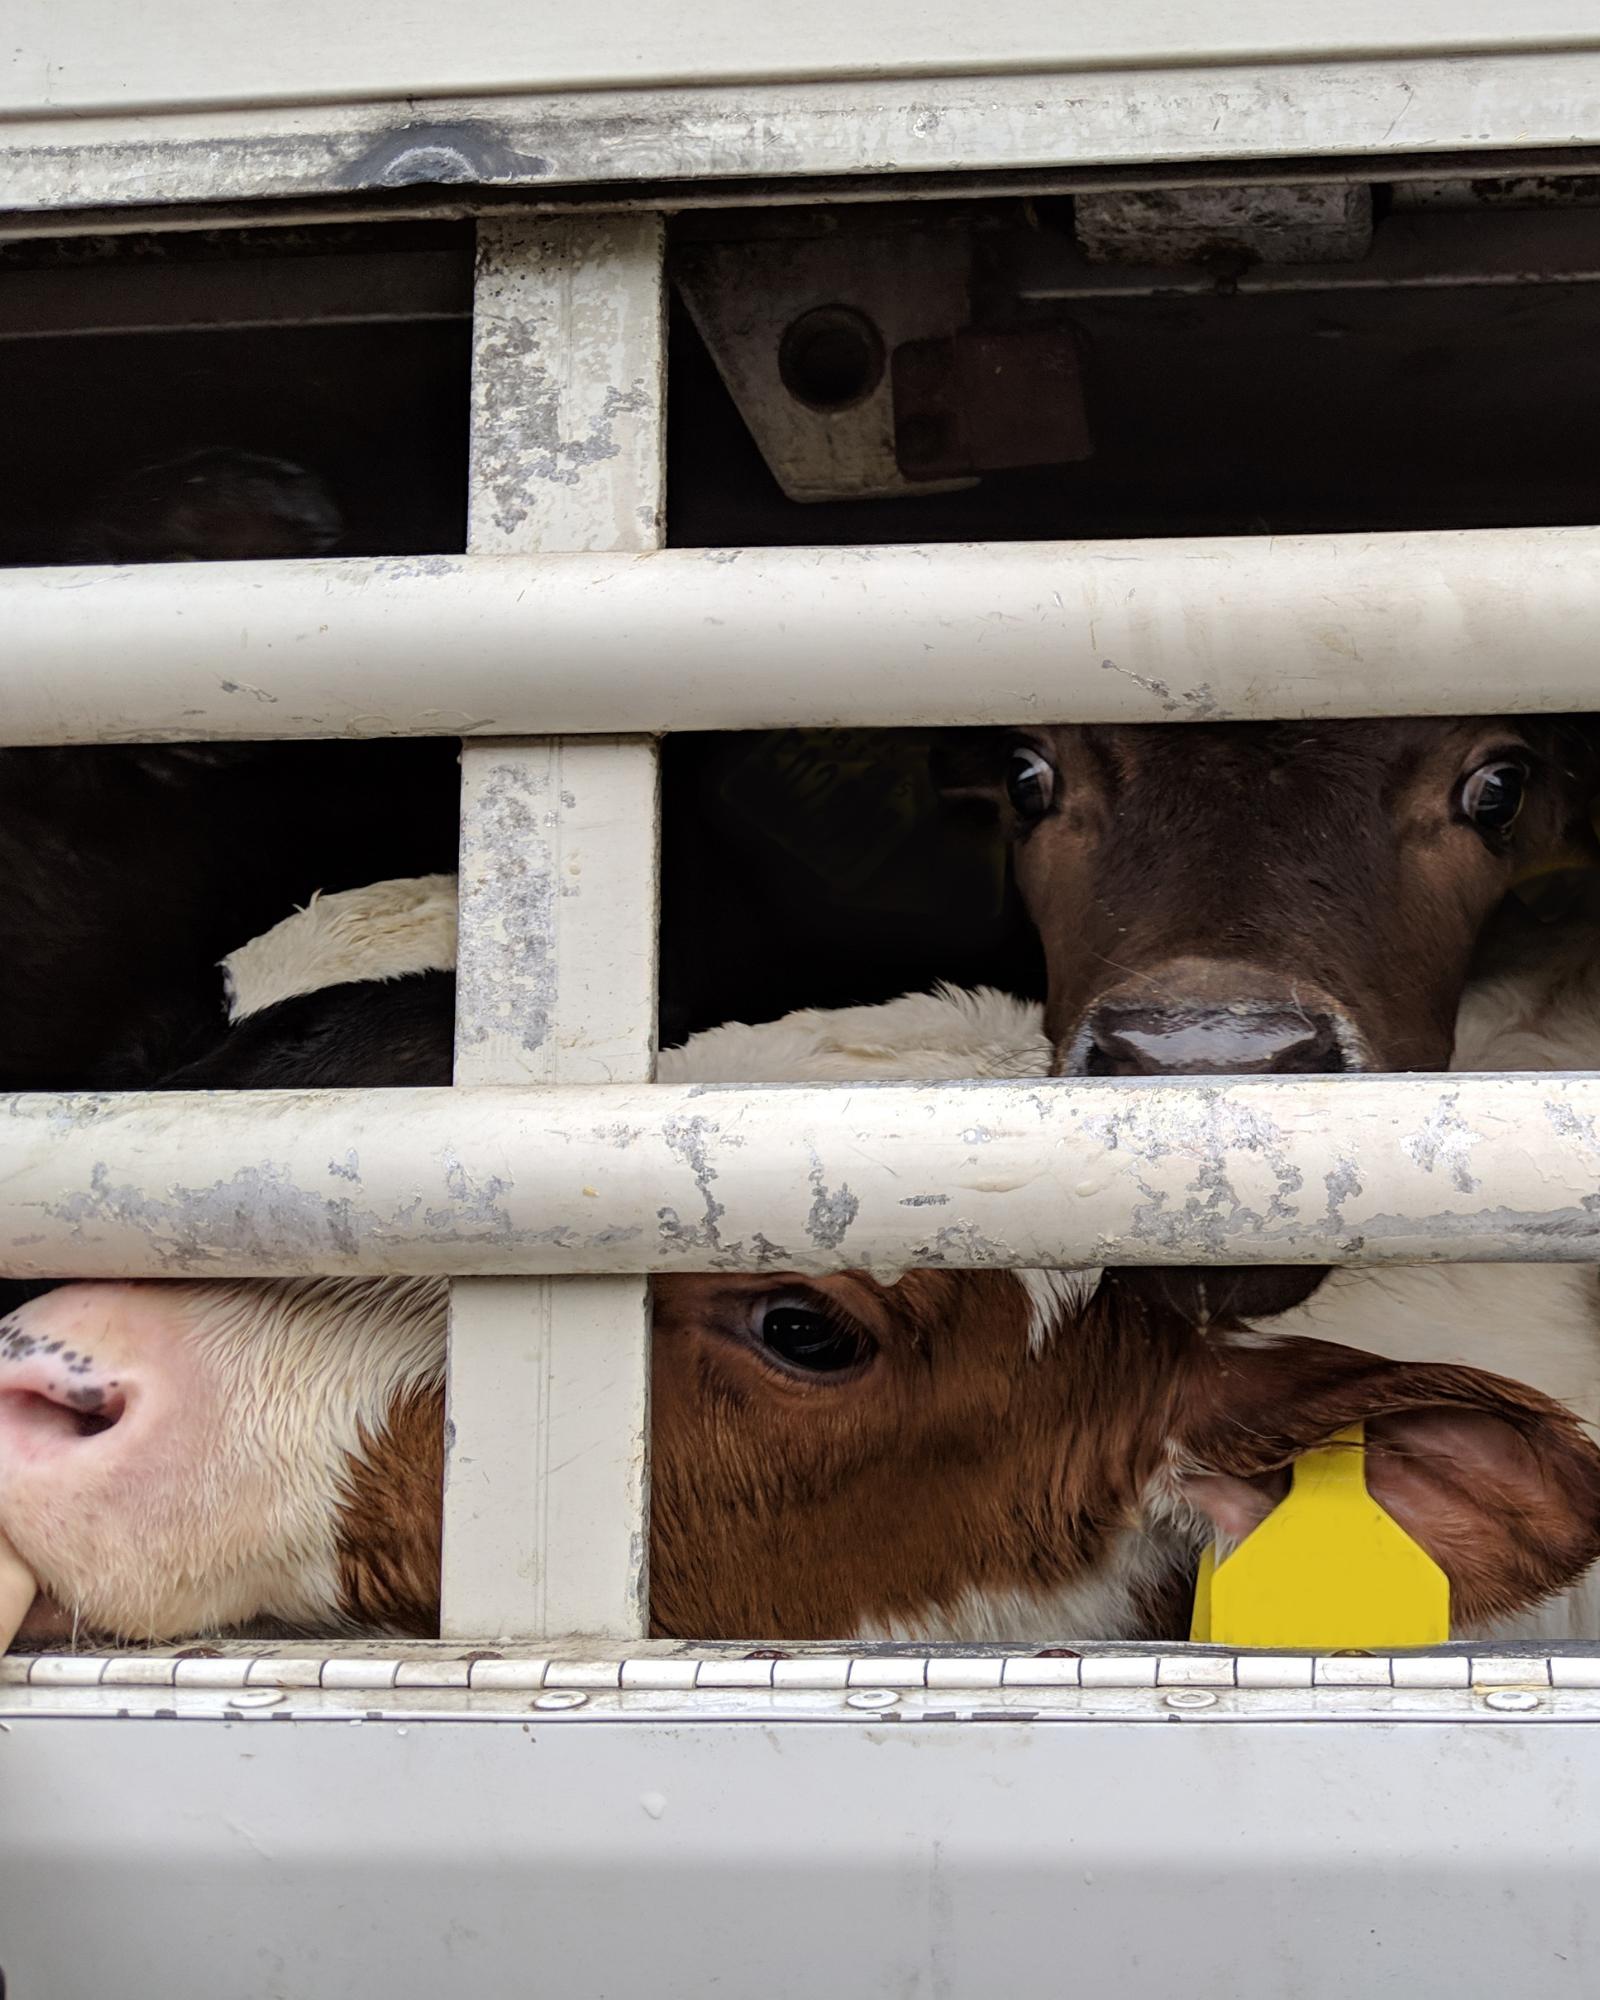 Frightened cows seen through bars of transport vehicle